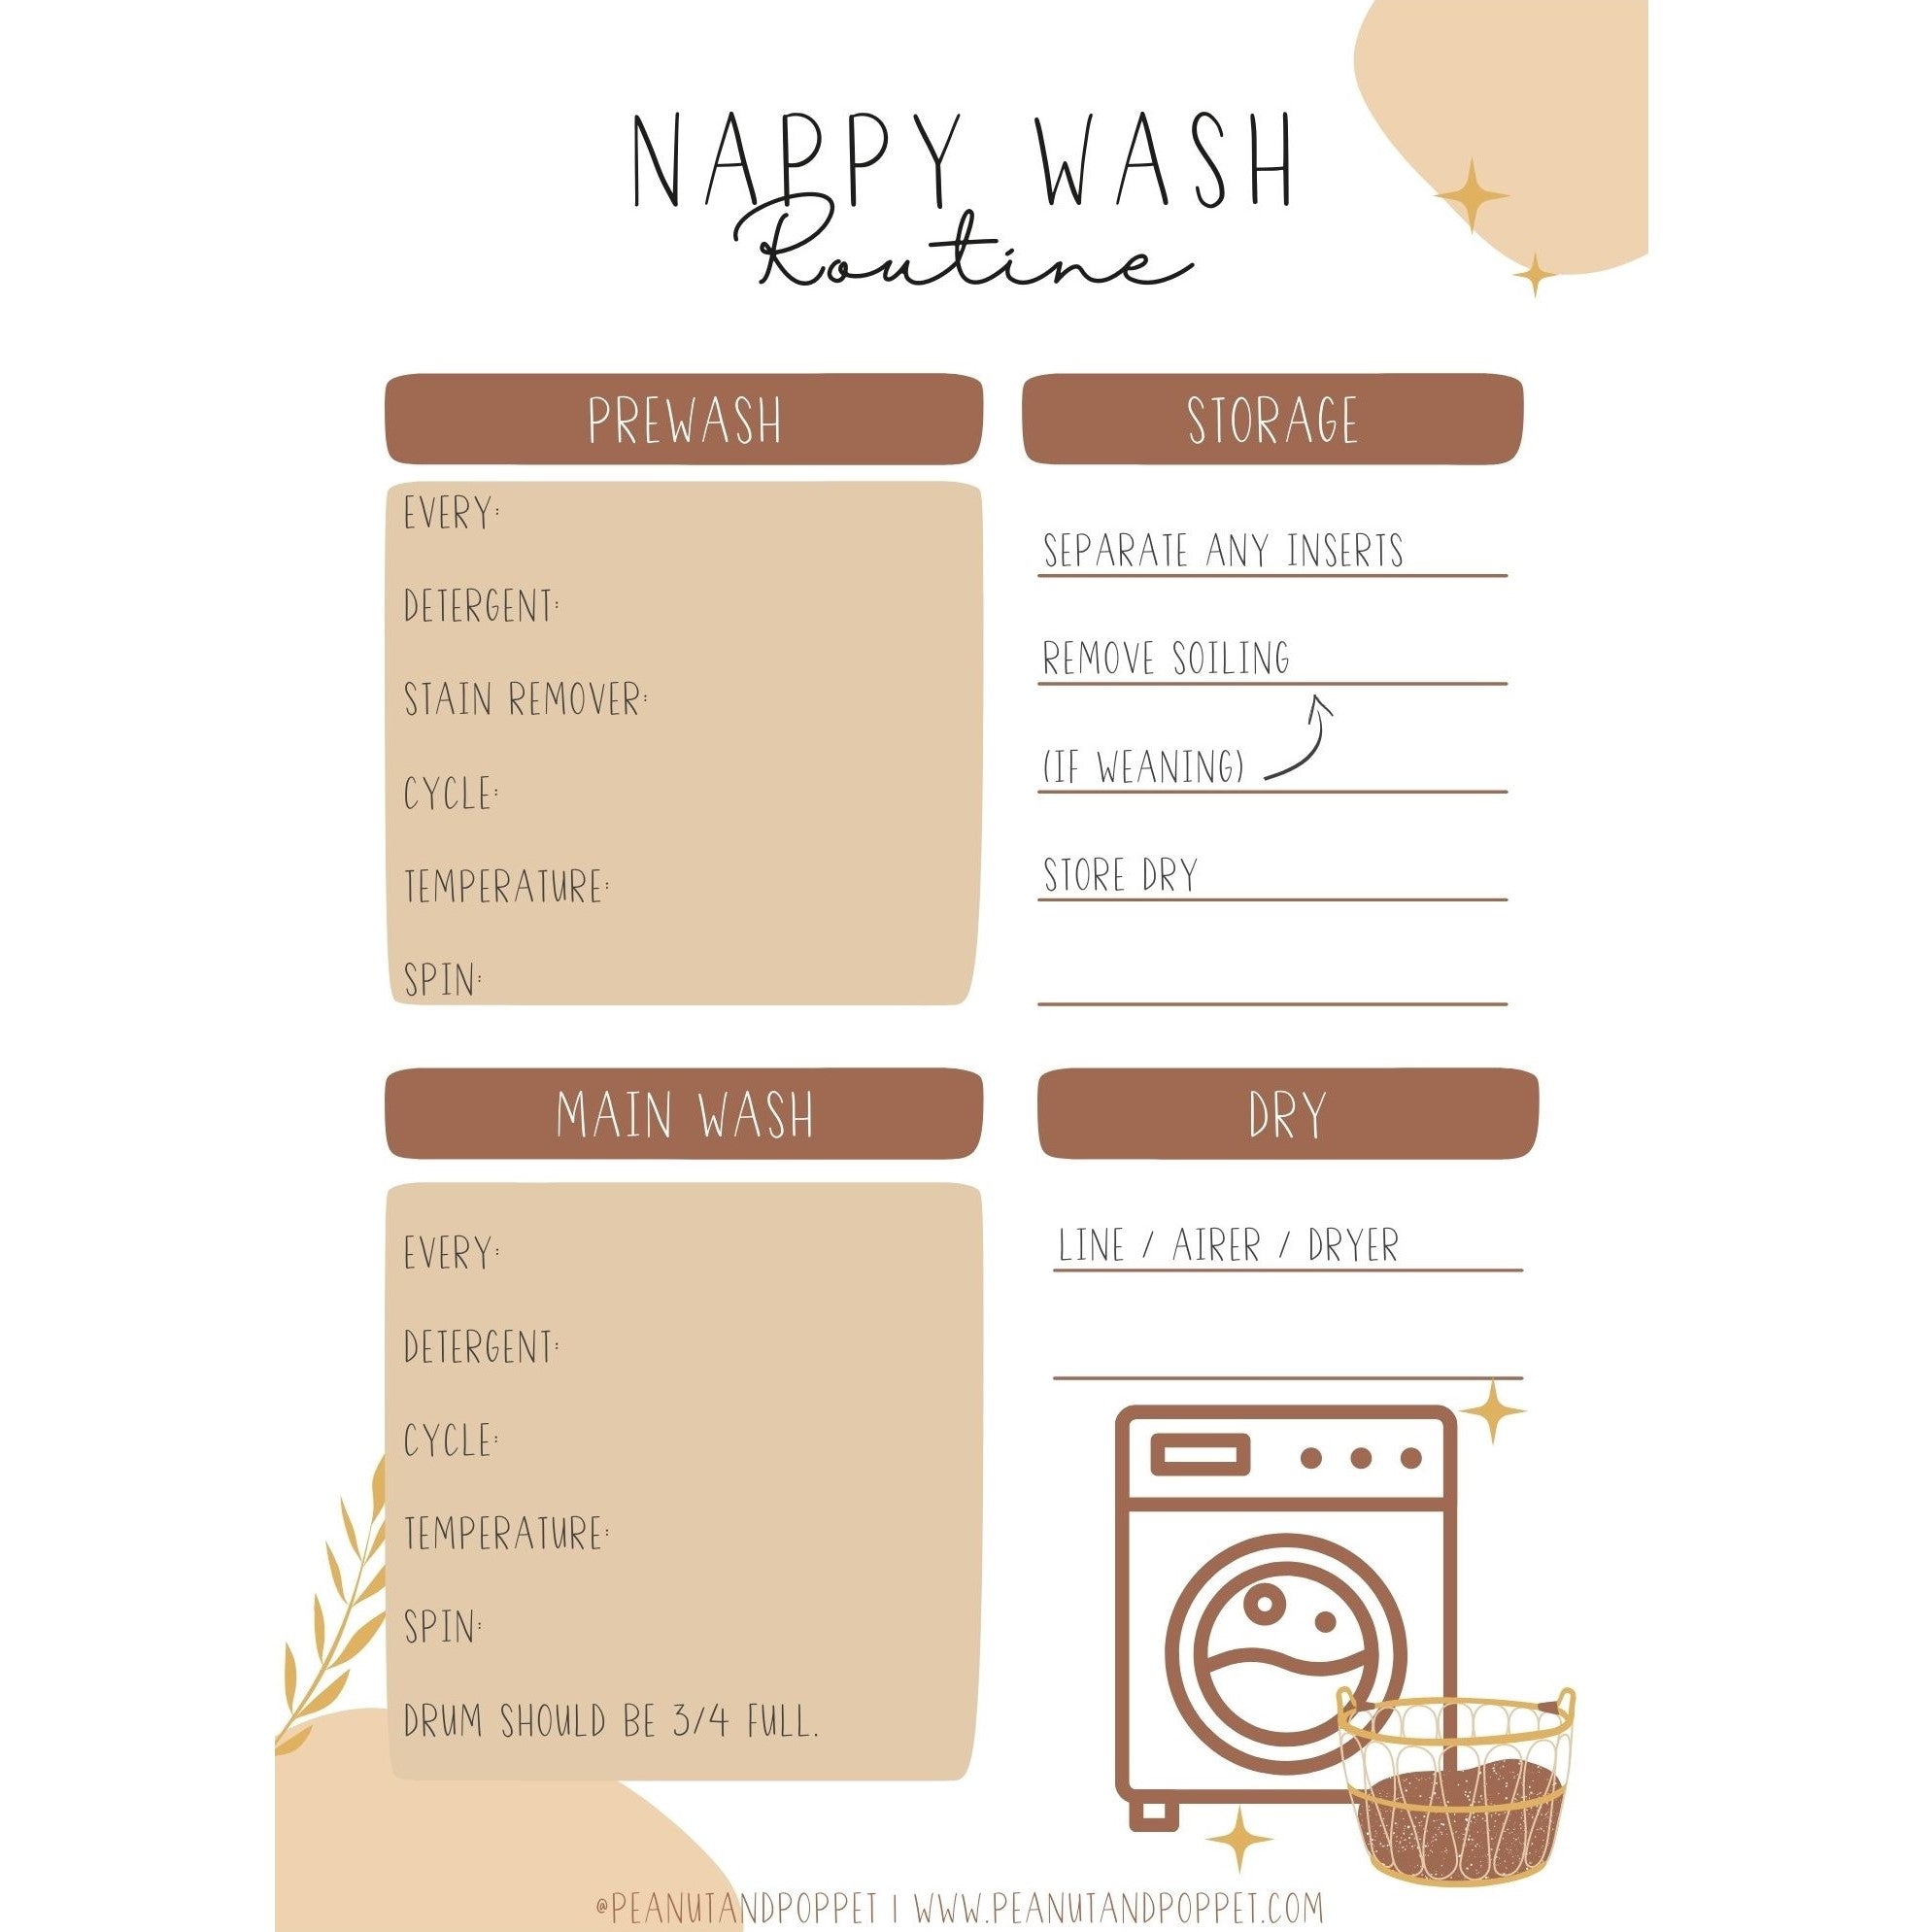 Free reusable nappy wash routine template (neutral) - washing instructions - Peanut and Poppet UK